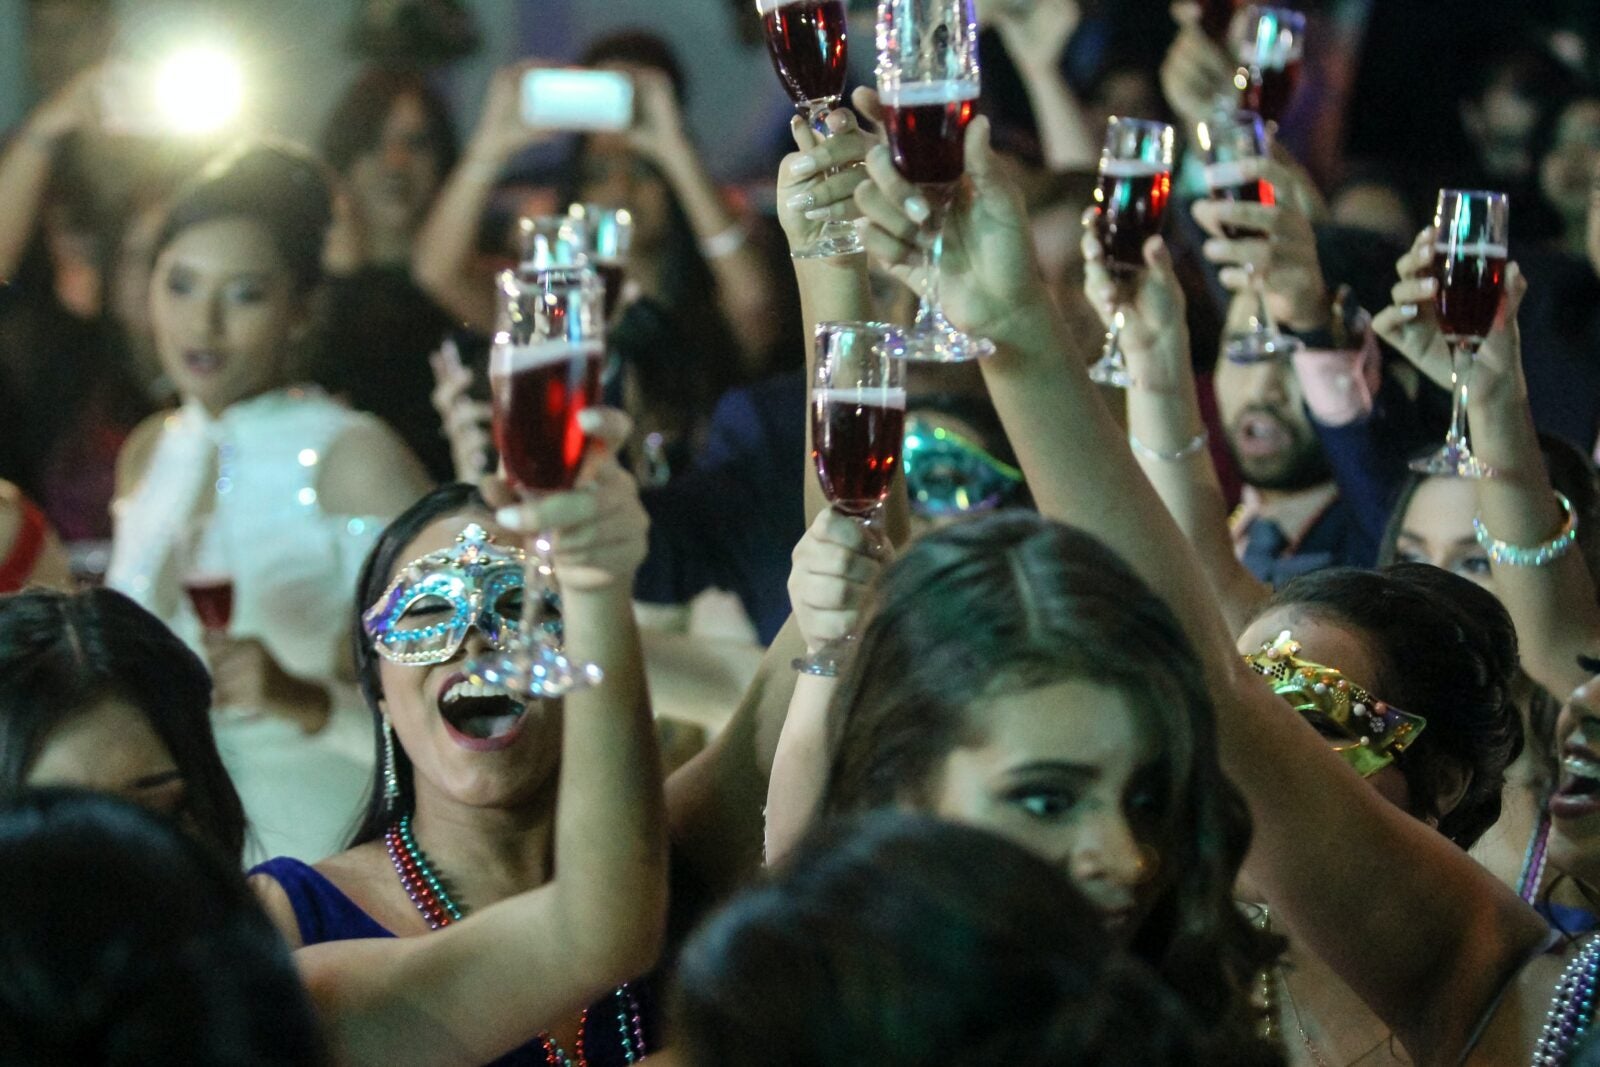 A party where some girls are wearing decorative masks and holding a glass of red liquid in the air.